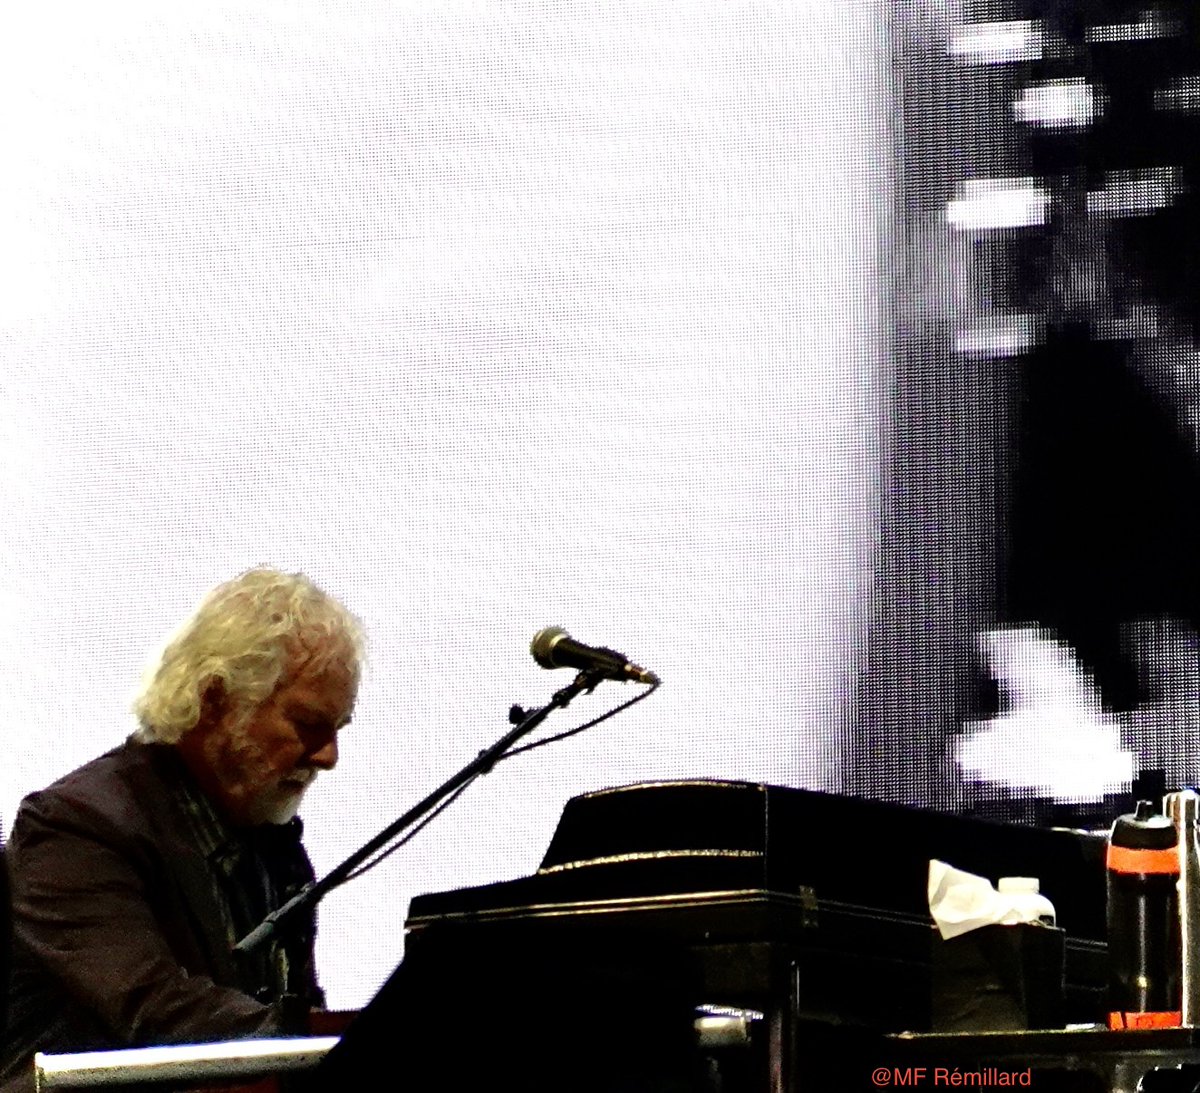 Chuck Leavell turns 72 years old today. 🎂

He will be celebrating tonight onstage with the Rolling Stones in Houston ! 
#AllmanBrothers #DavidGilmour #RollingStones